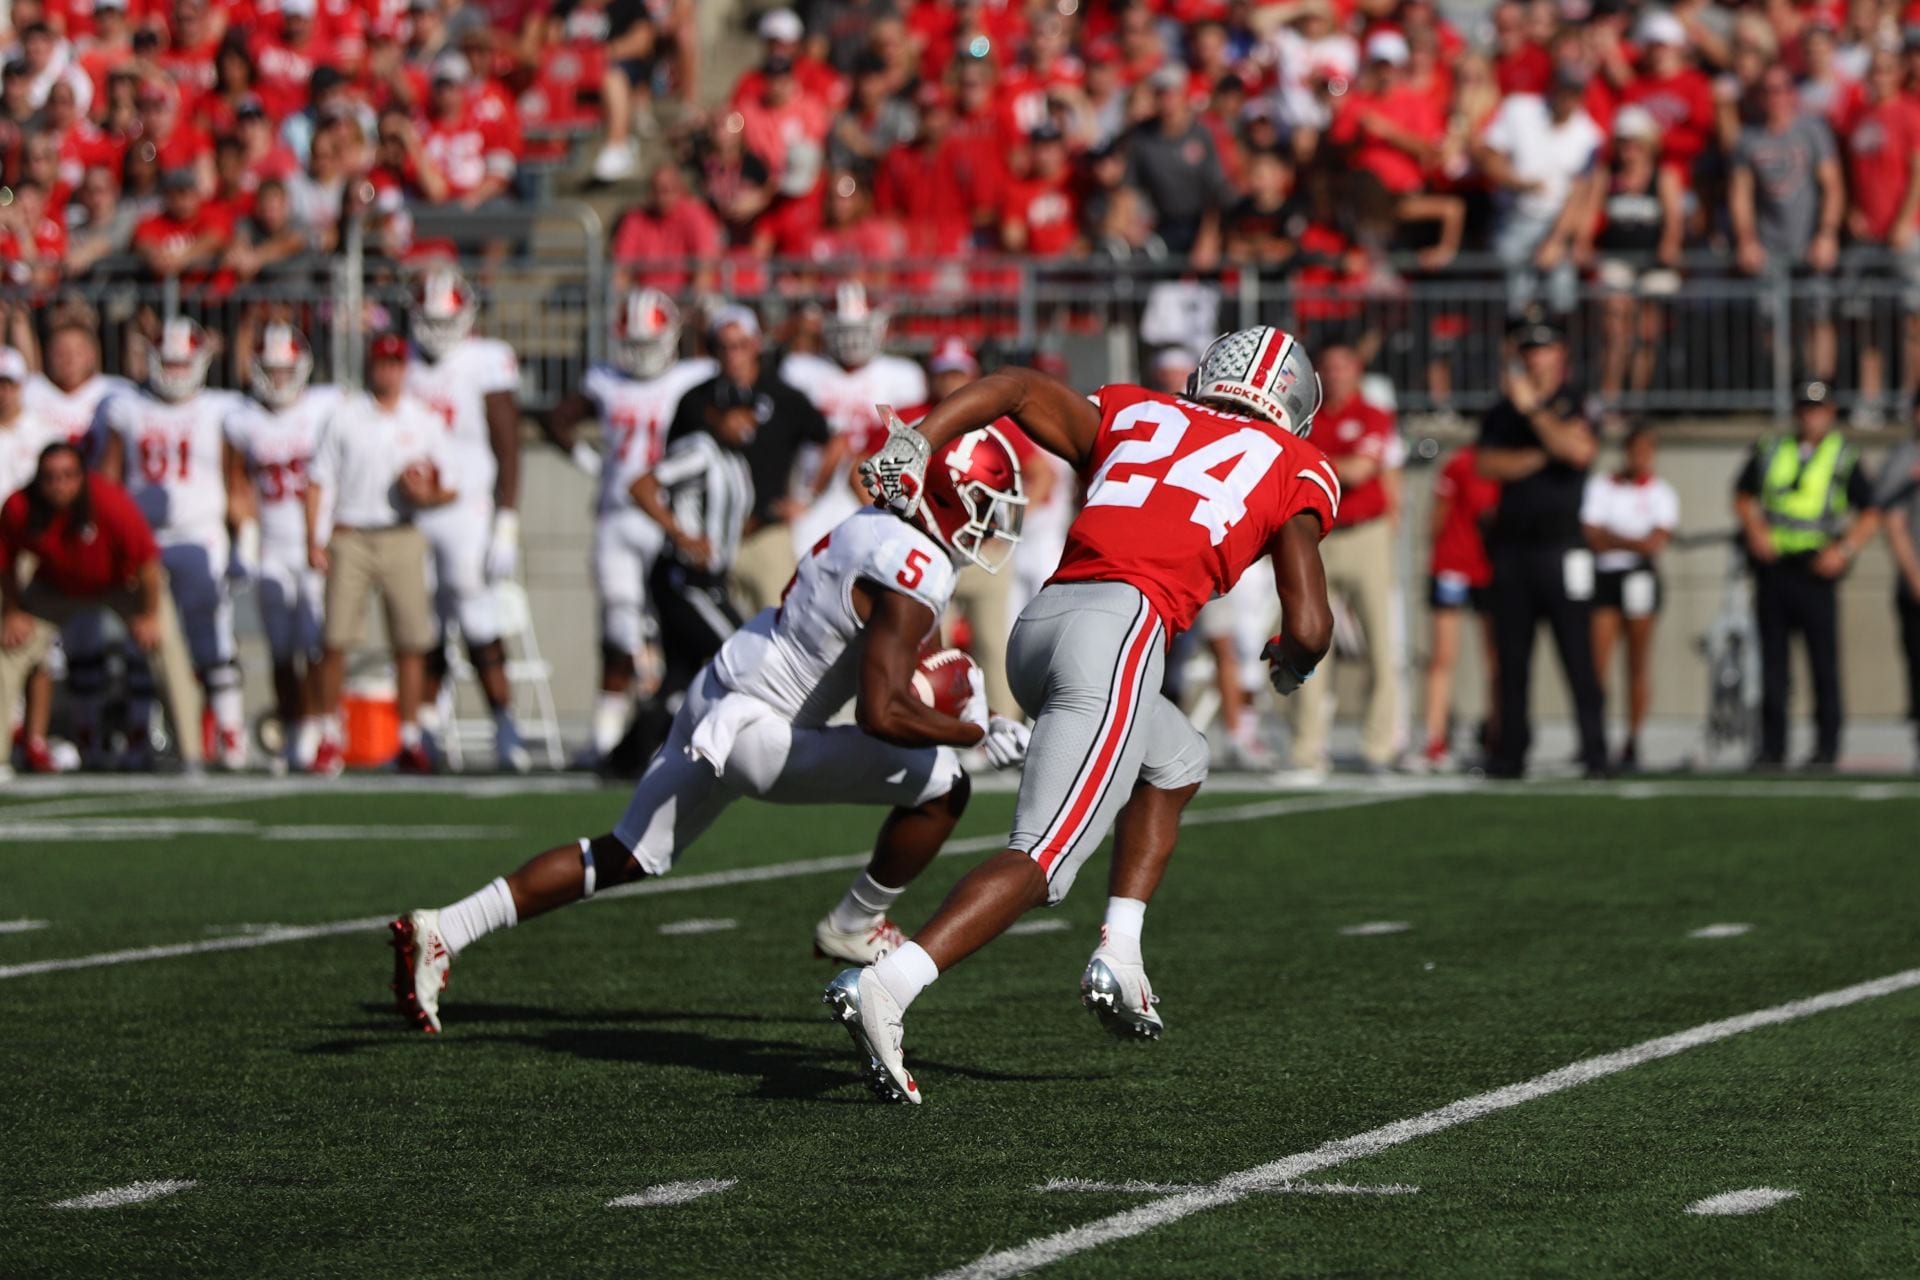 Ohio State cornerback Shaun Wade chases down an Indiana receiver with the ball